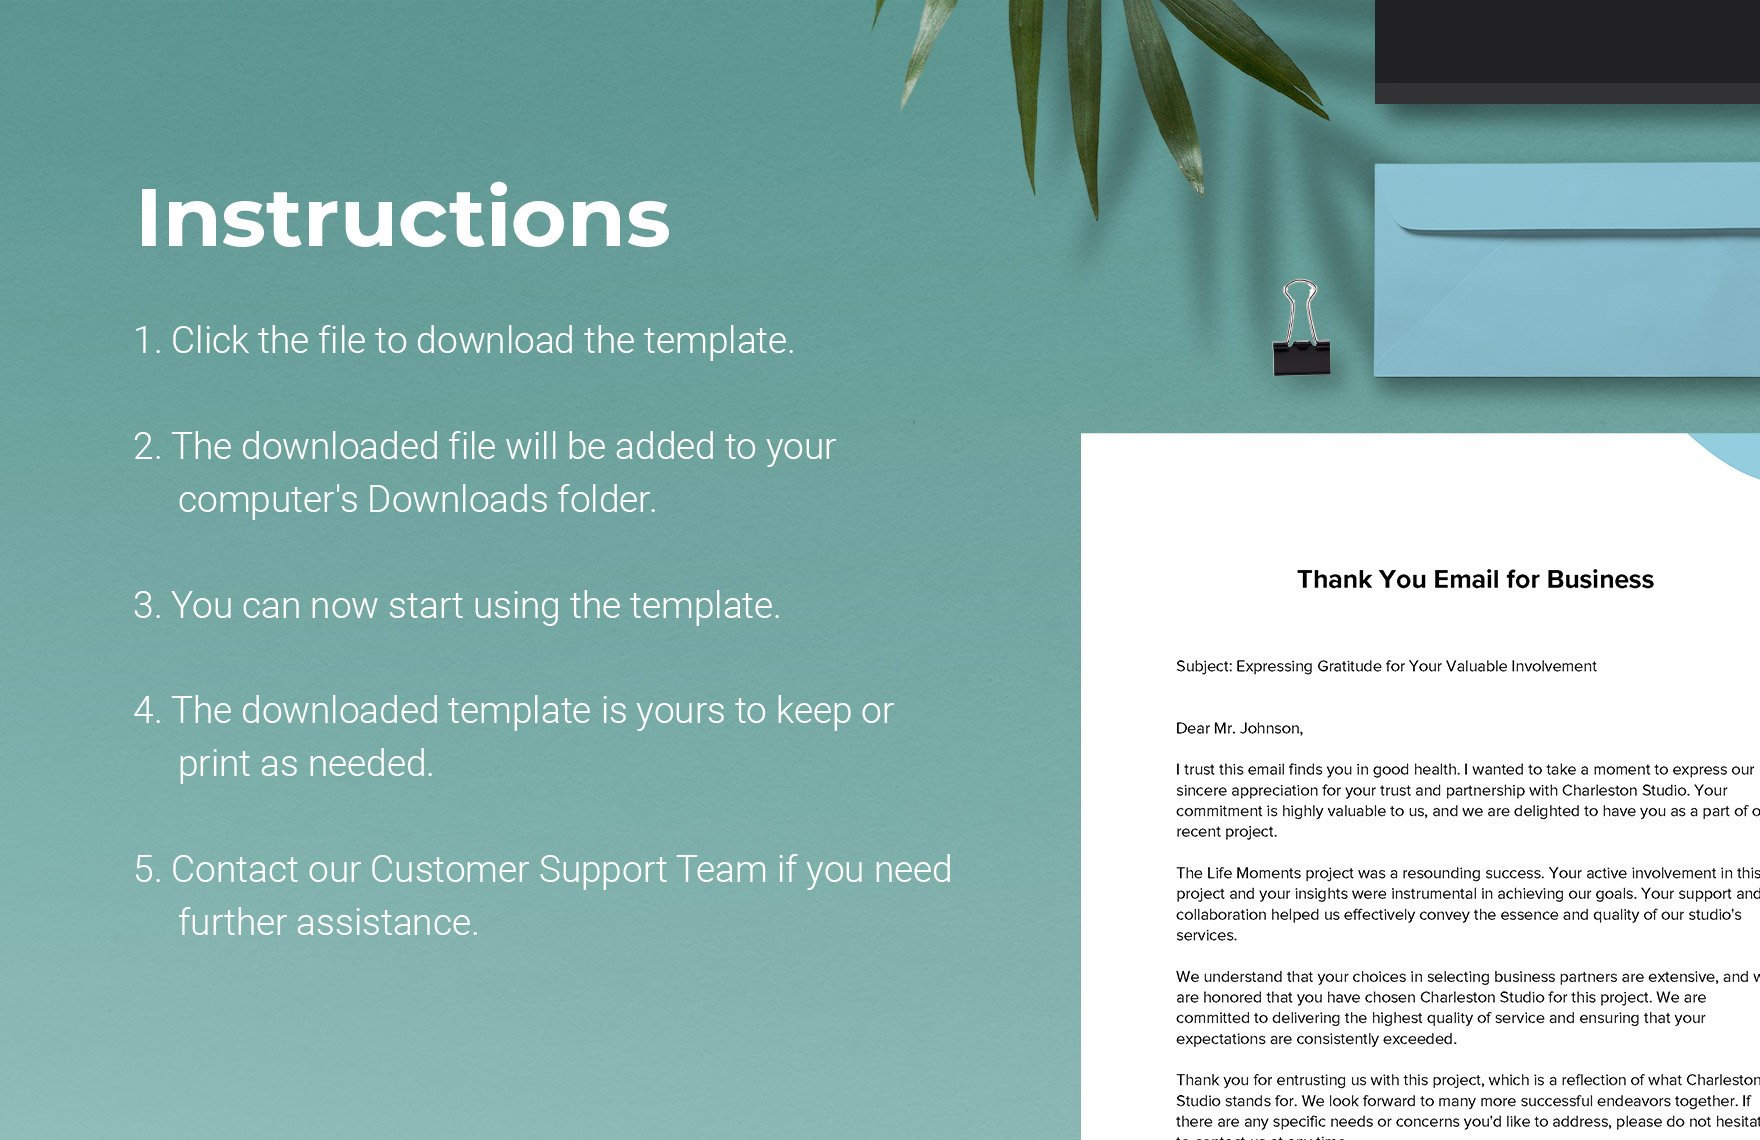 Thank You Email for Business Template